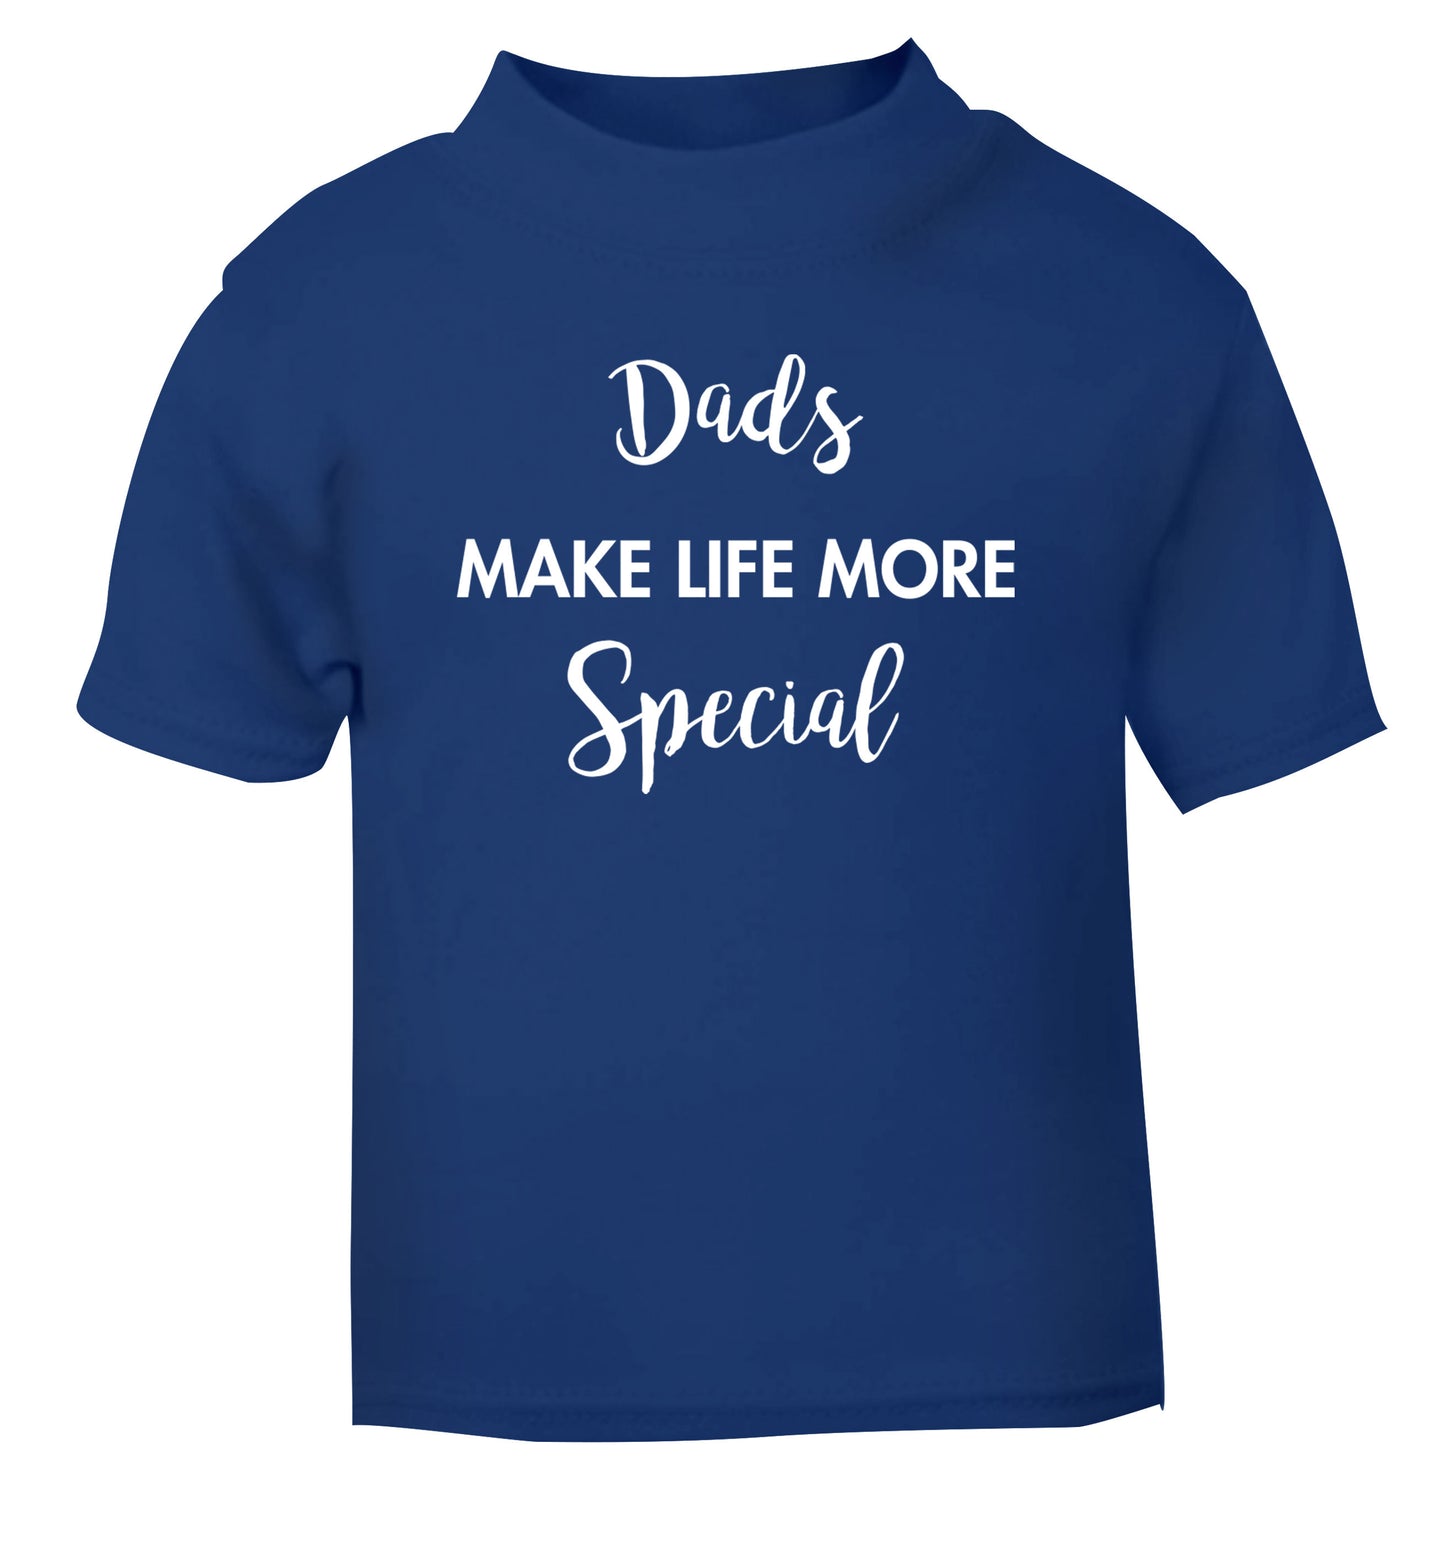 Dads make life more special blue Baby Toddler Tshirt 2 Years